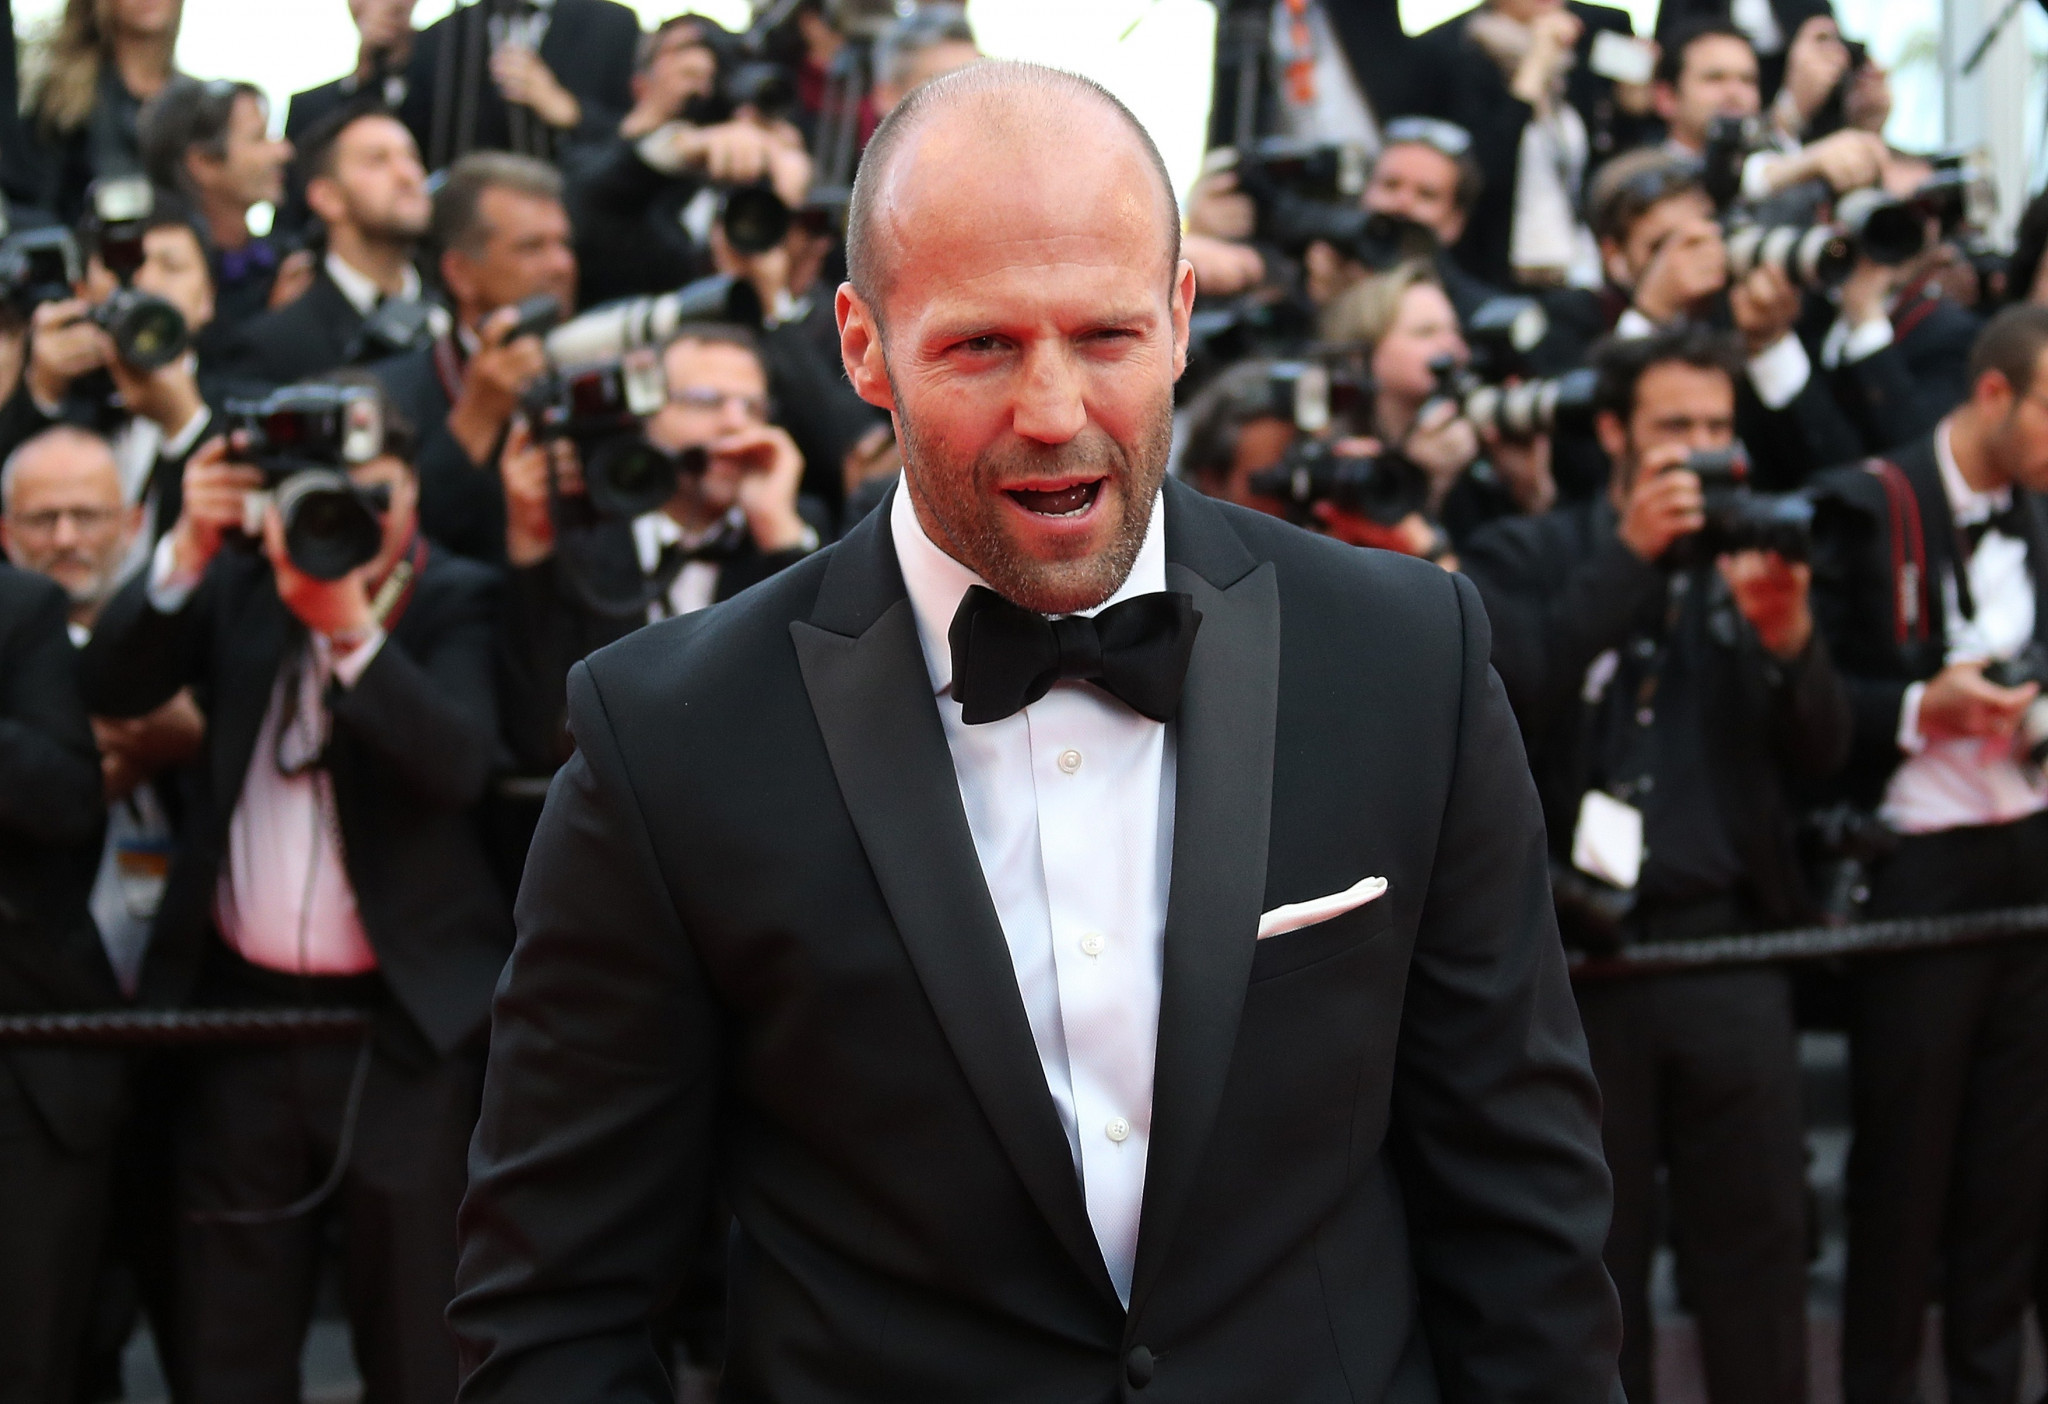 British actor Jason Statham, pictured on the red carpet at the 2014 Cannes Film Festival for the viewing of The Expendables 3, was a member of the British diving team for 12 years before turning to acting ©Getty Images